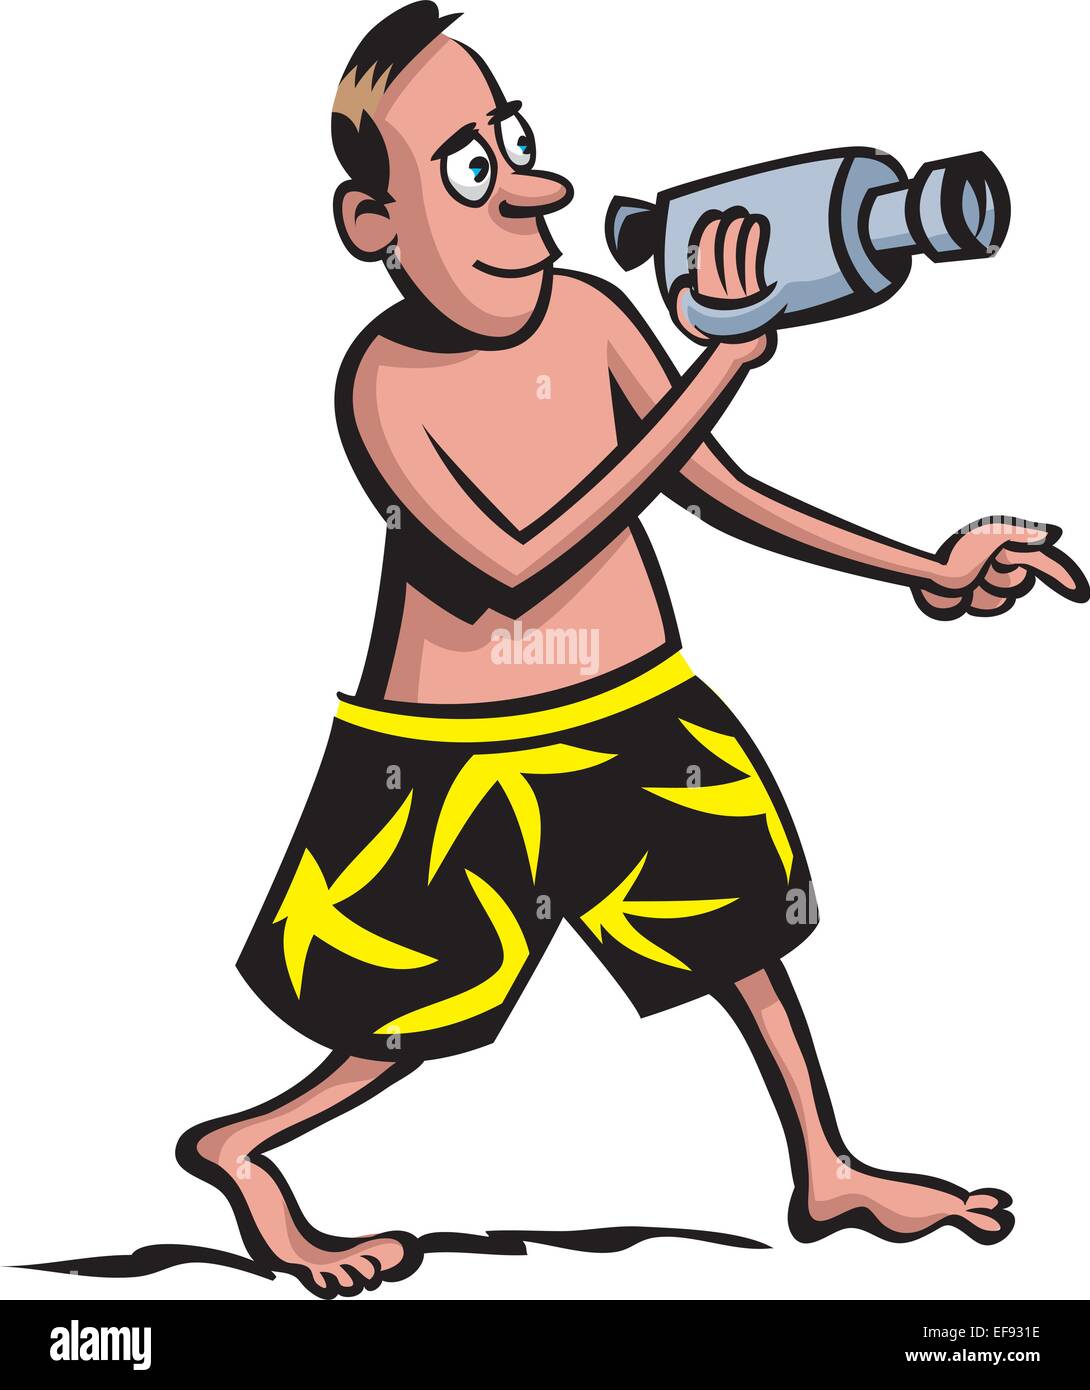 A man holding a video camera and wearing shorts Stock Vector